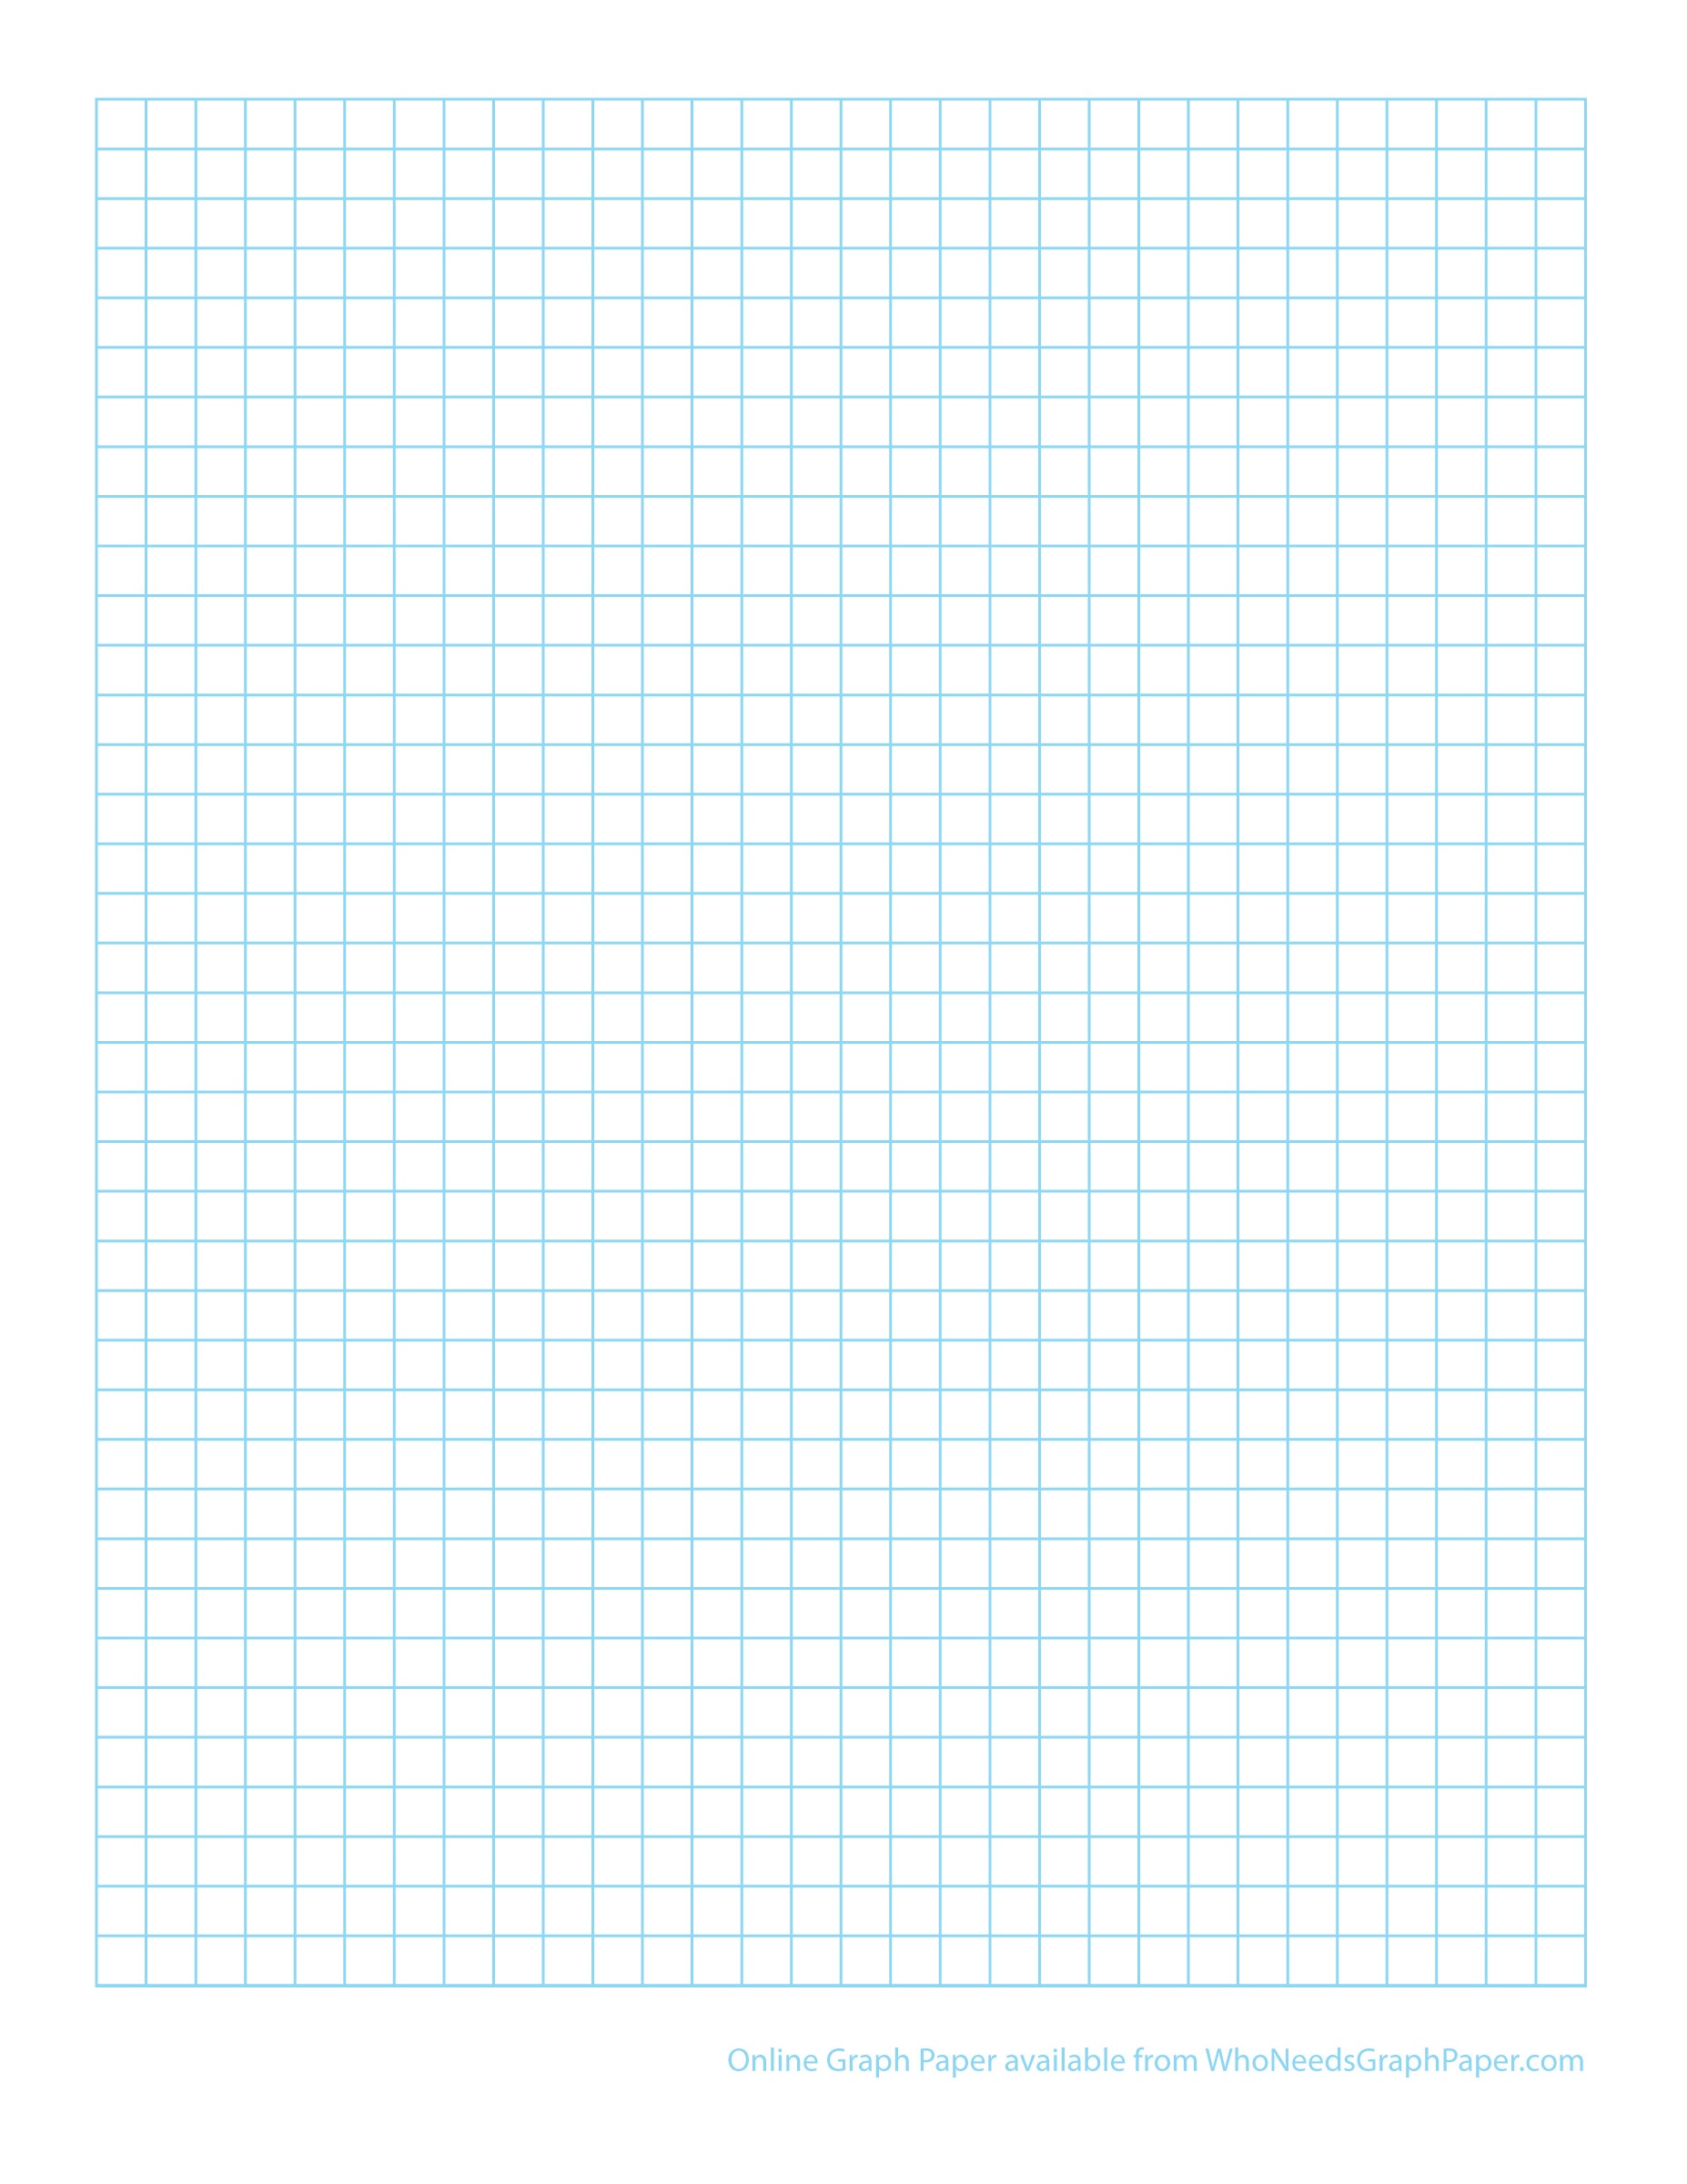 Print Out Graph Paper Online Free - Demir.iso-Consulting.co - Free Printable Graph Paper With Numbers